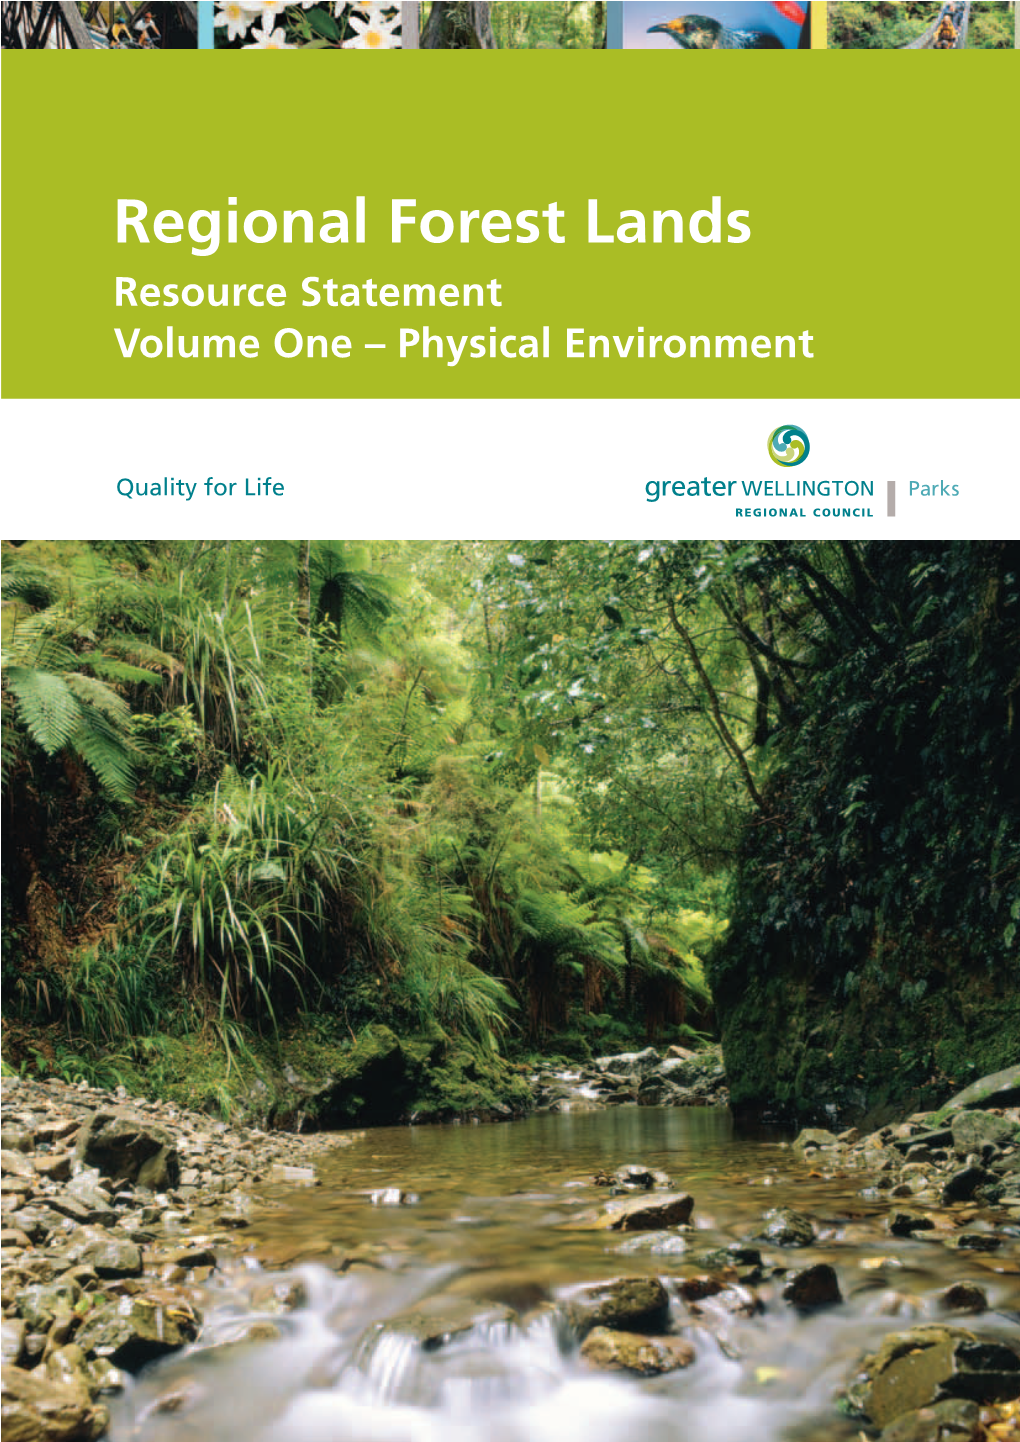 Regional Forest Lands Resource Statement Volume One – Physical Environment